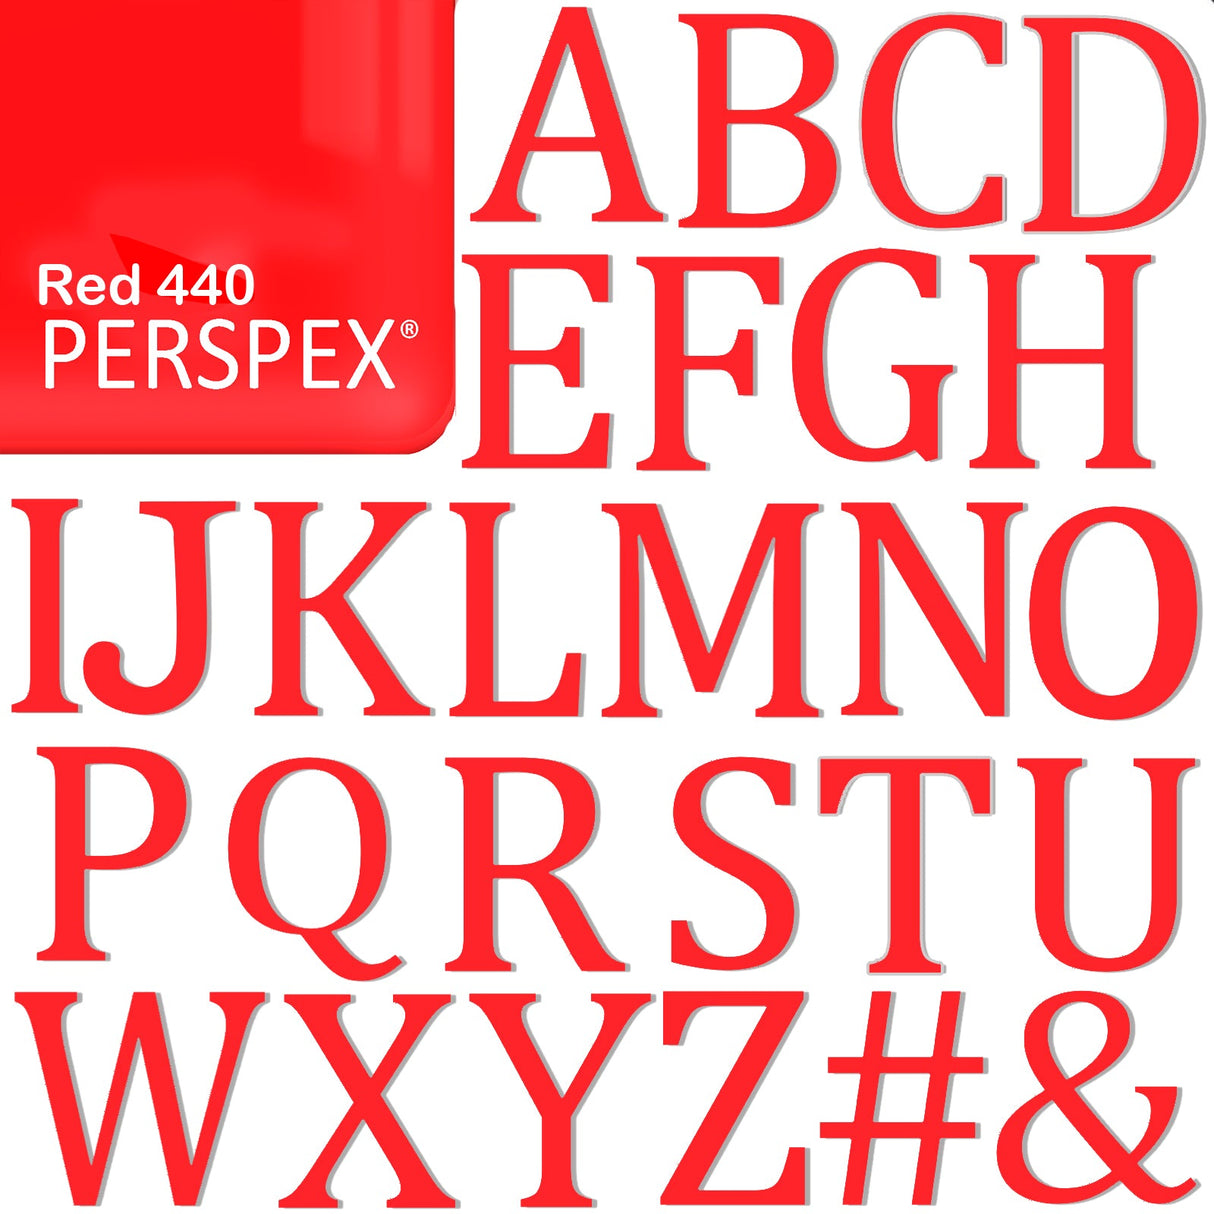 Acrylic 12.5cm High Letters & Numbers - 25 Colours - Multi Buy Discounts - Laserworksuk